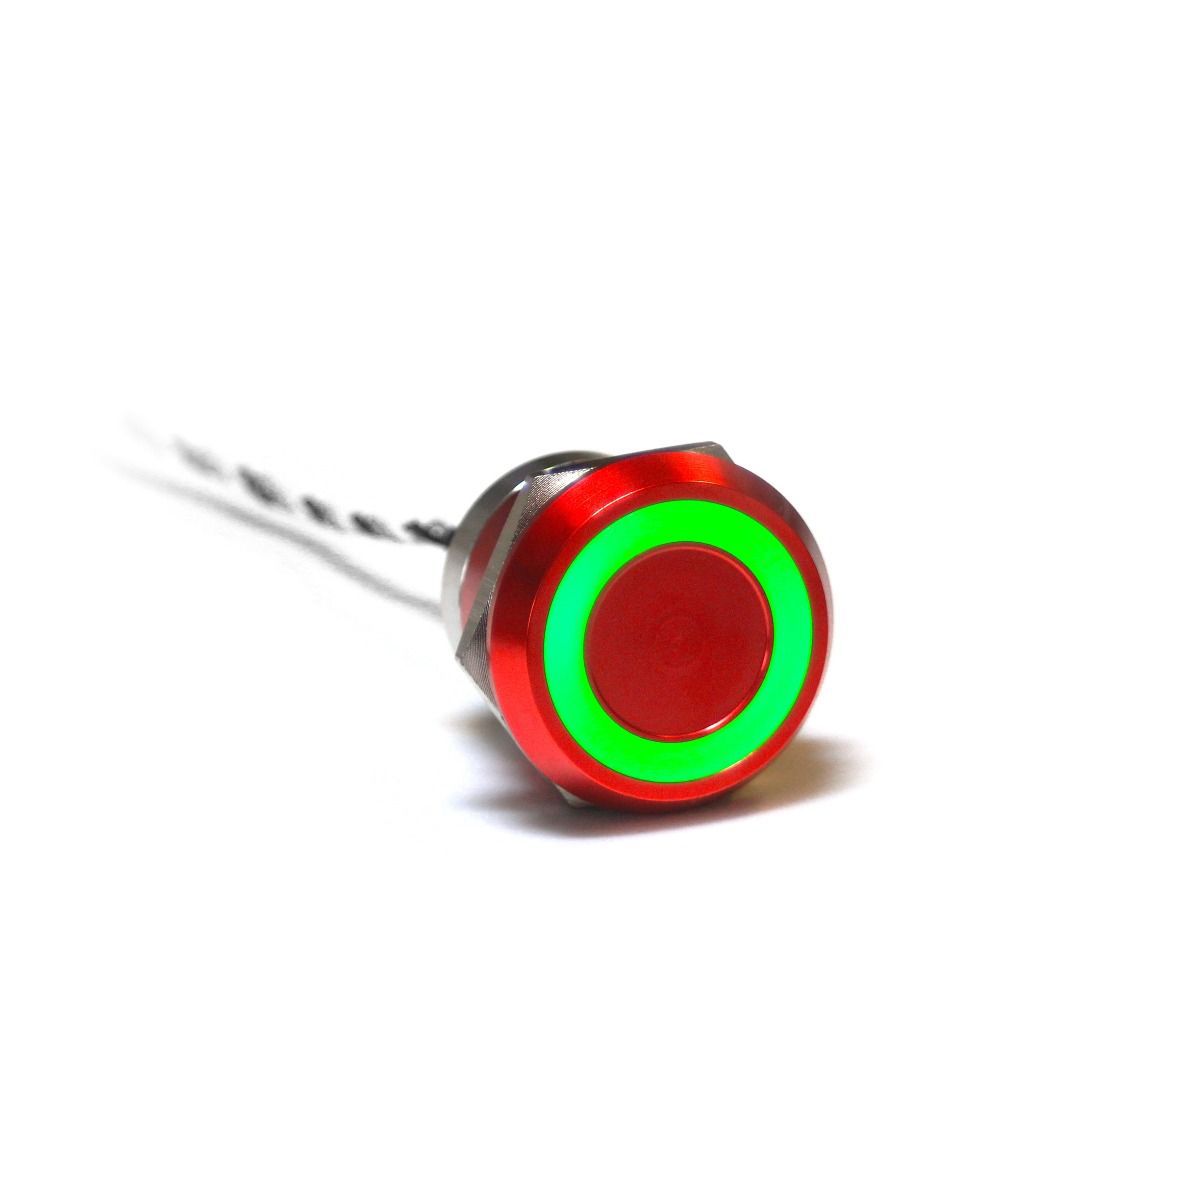 Capacitive Switch Latching NC,Illuminated, Green, Red, IP68, IP69K Red Anodised